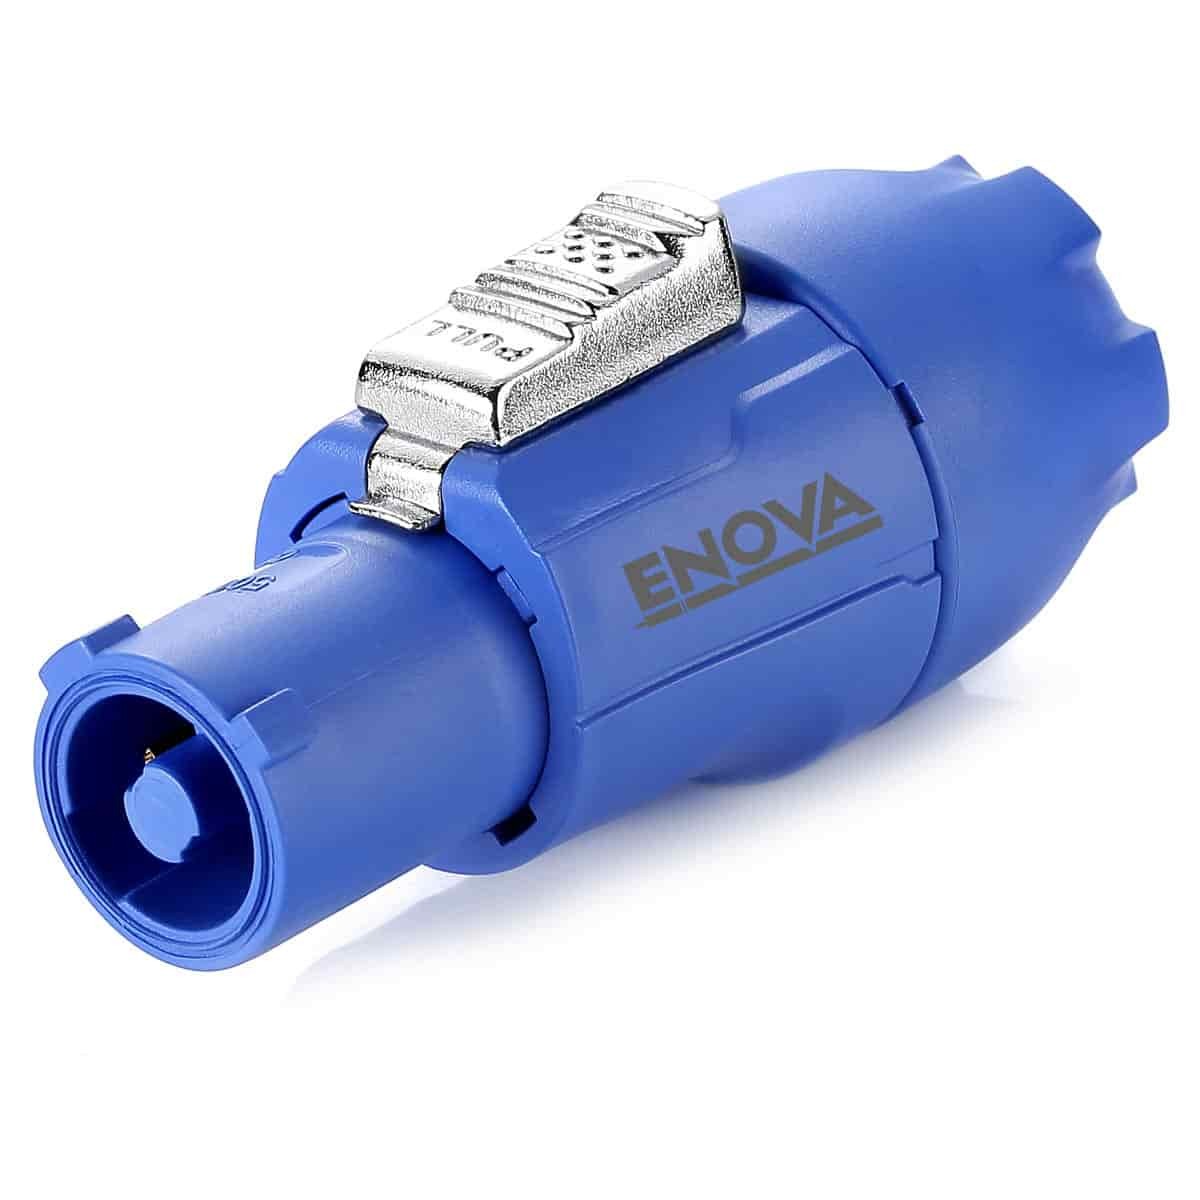 Power current connector "Input" with interlock. 230V max. 20 Amps. Blue housing